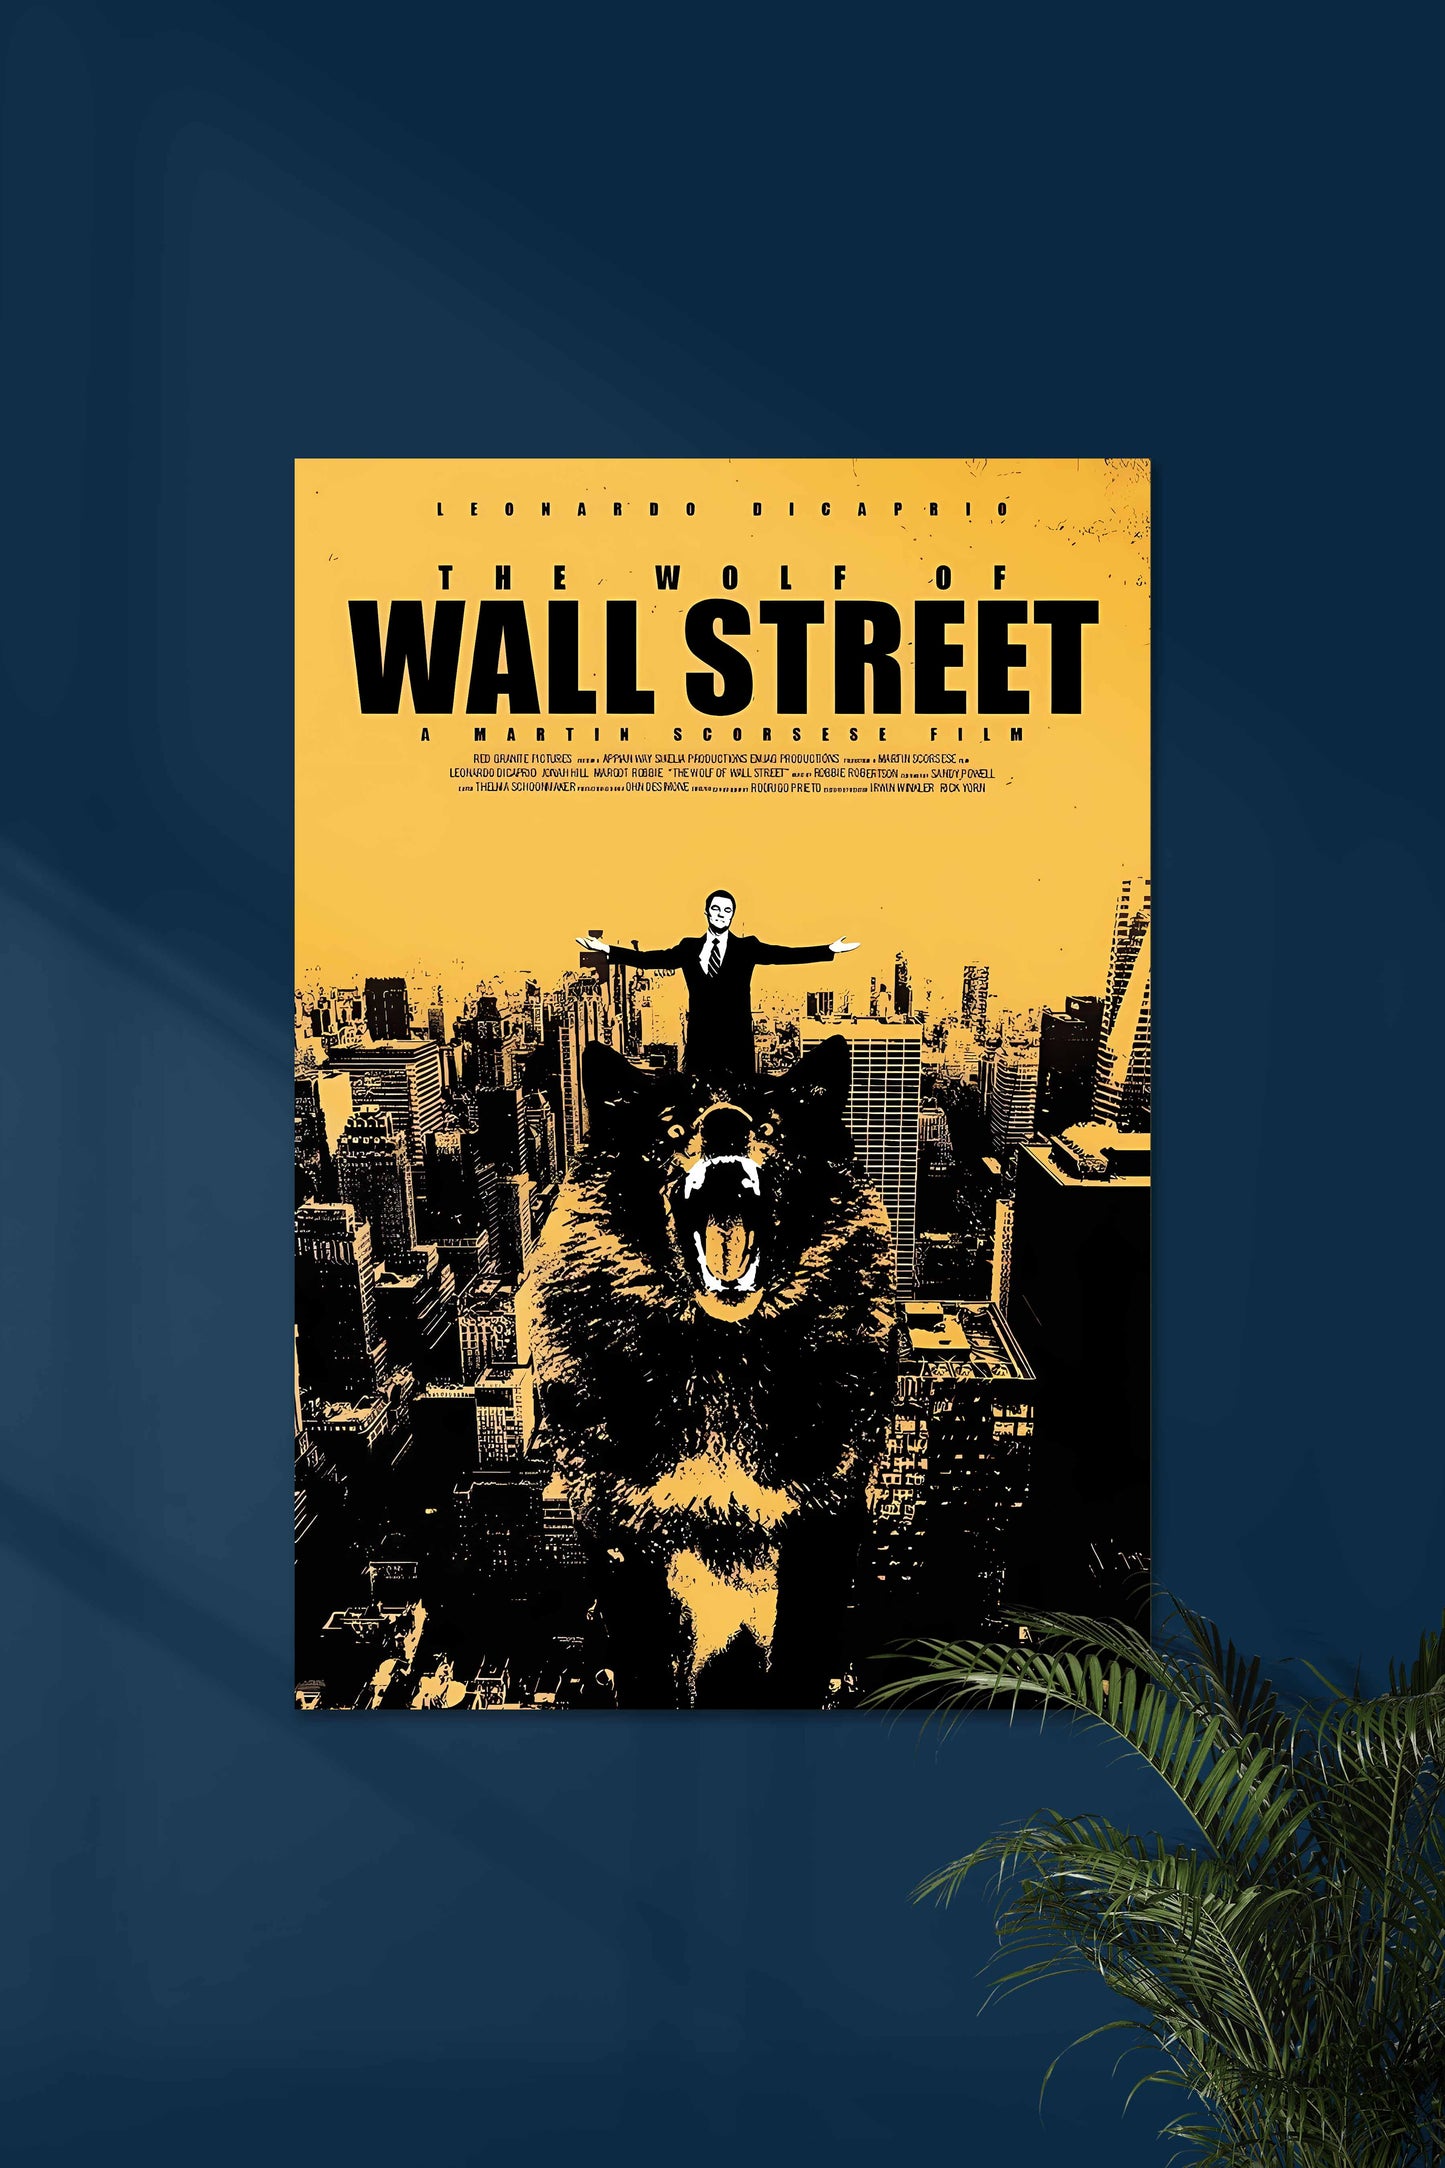 A MARTIN SCORSESE FILM | Wolf Of Wall Street | Money Aesthetic Poster